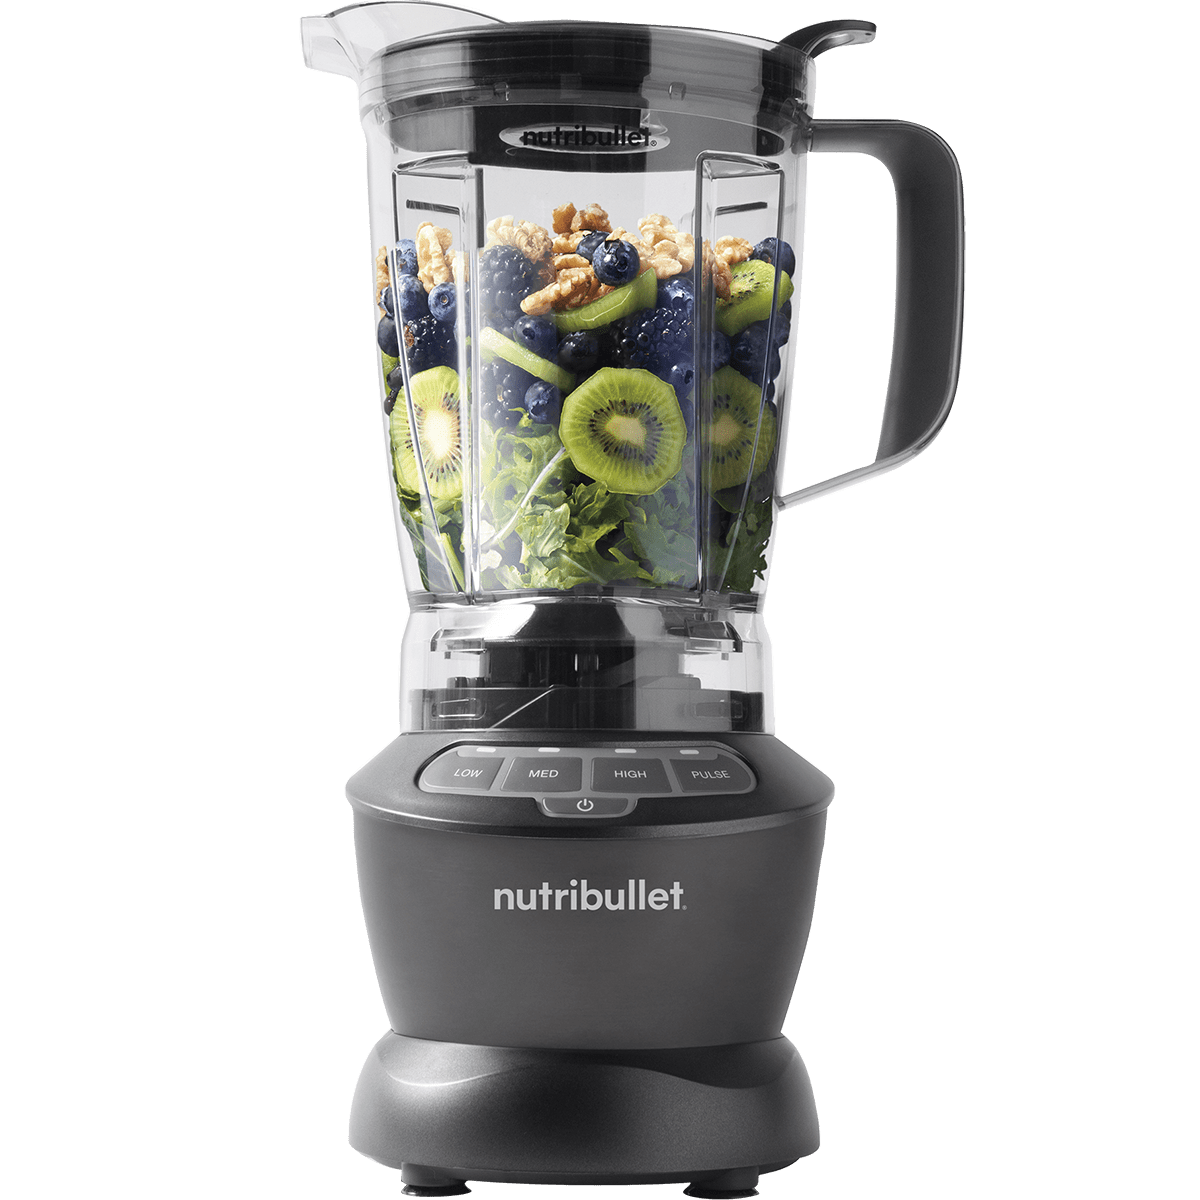 https://s3-assets.quenchessentials.com/media/images/products/nutribullet-nbf50400-blender-main.png